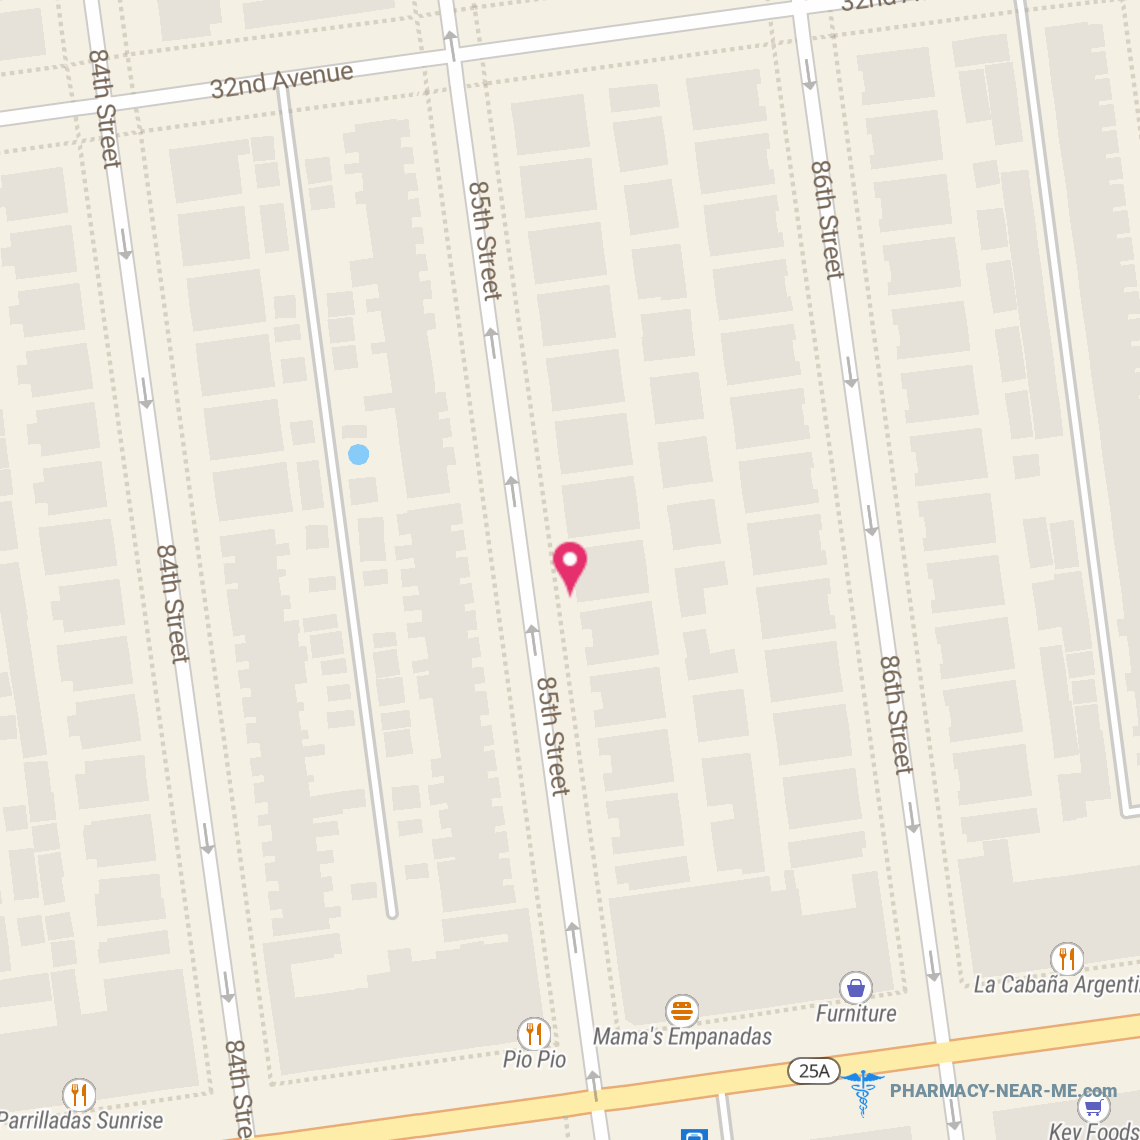 ARCH PHARMACY INC - Pharmacy Hours, Phone, Reviews & Information: 3261 85th St, Queens, New York 11370, United States